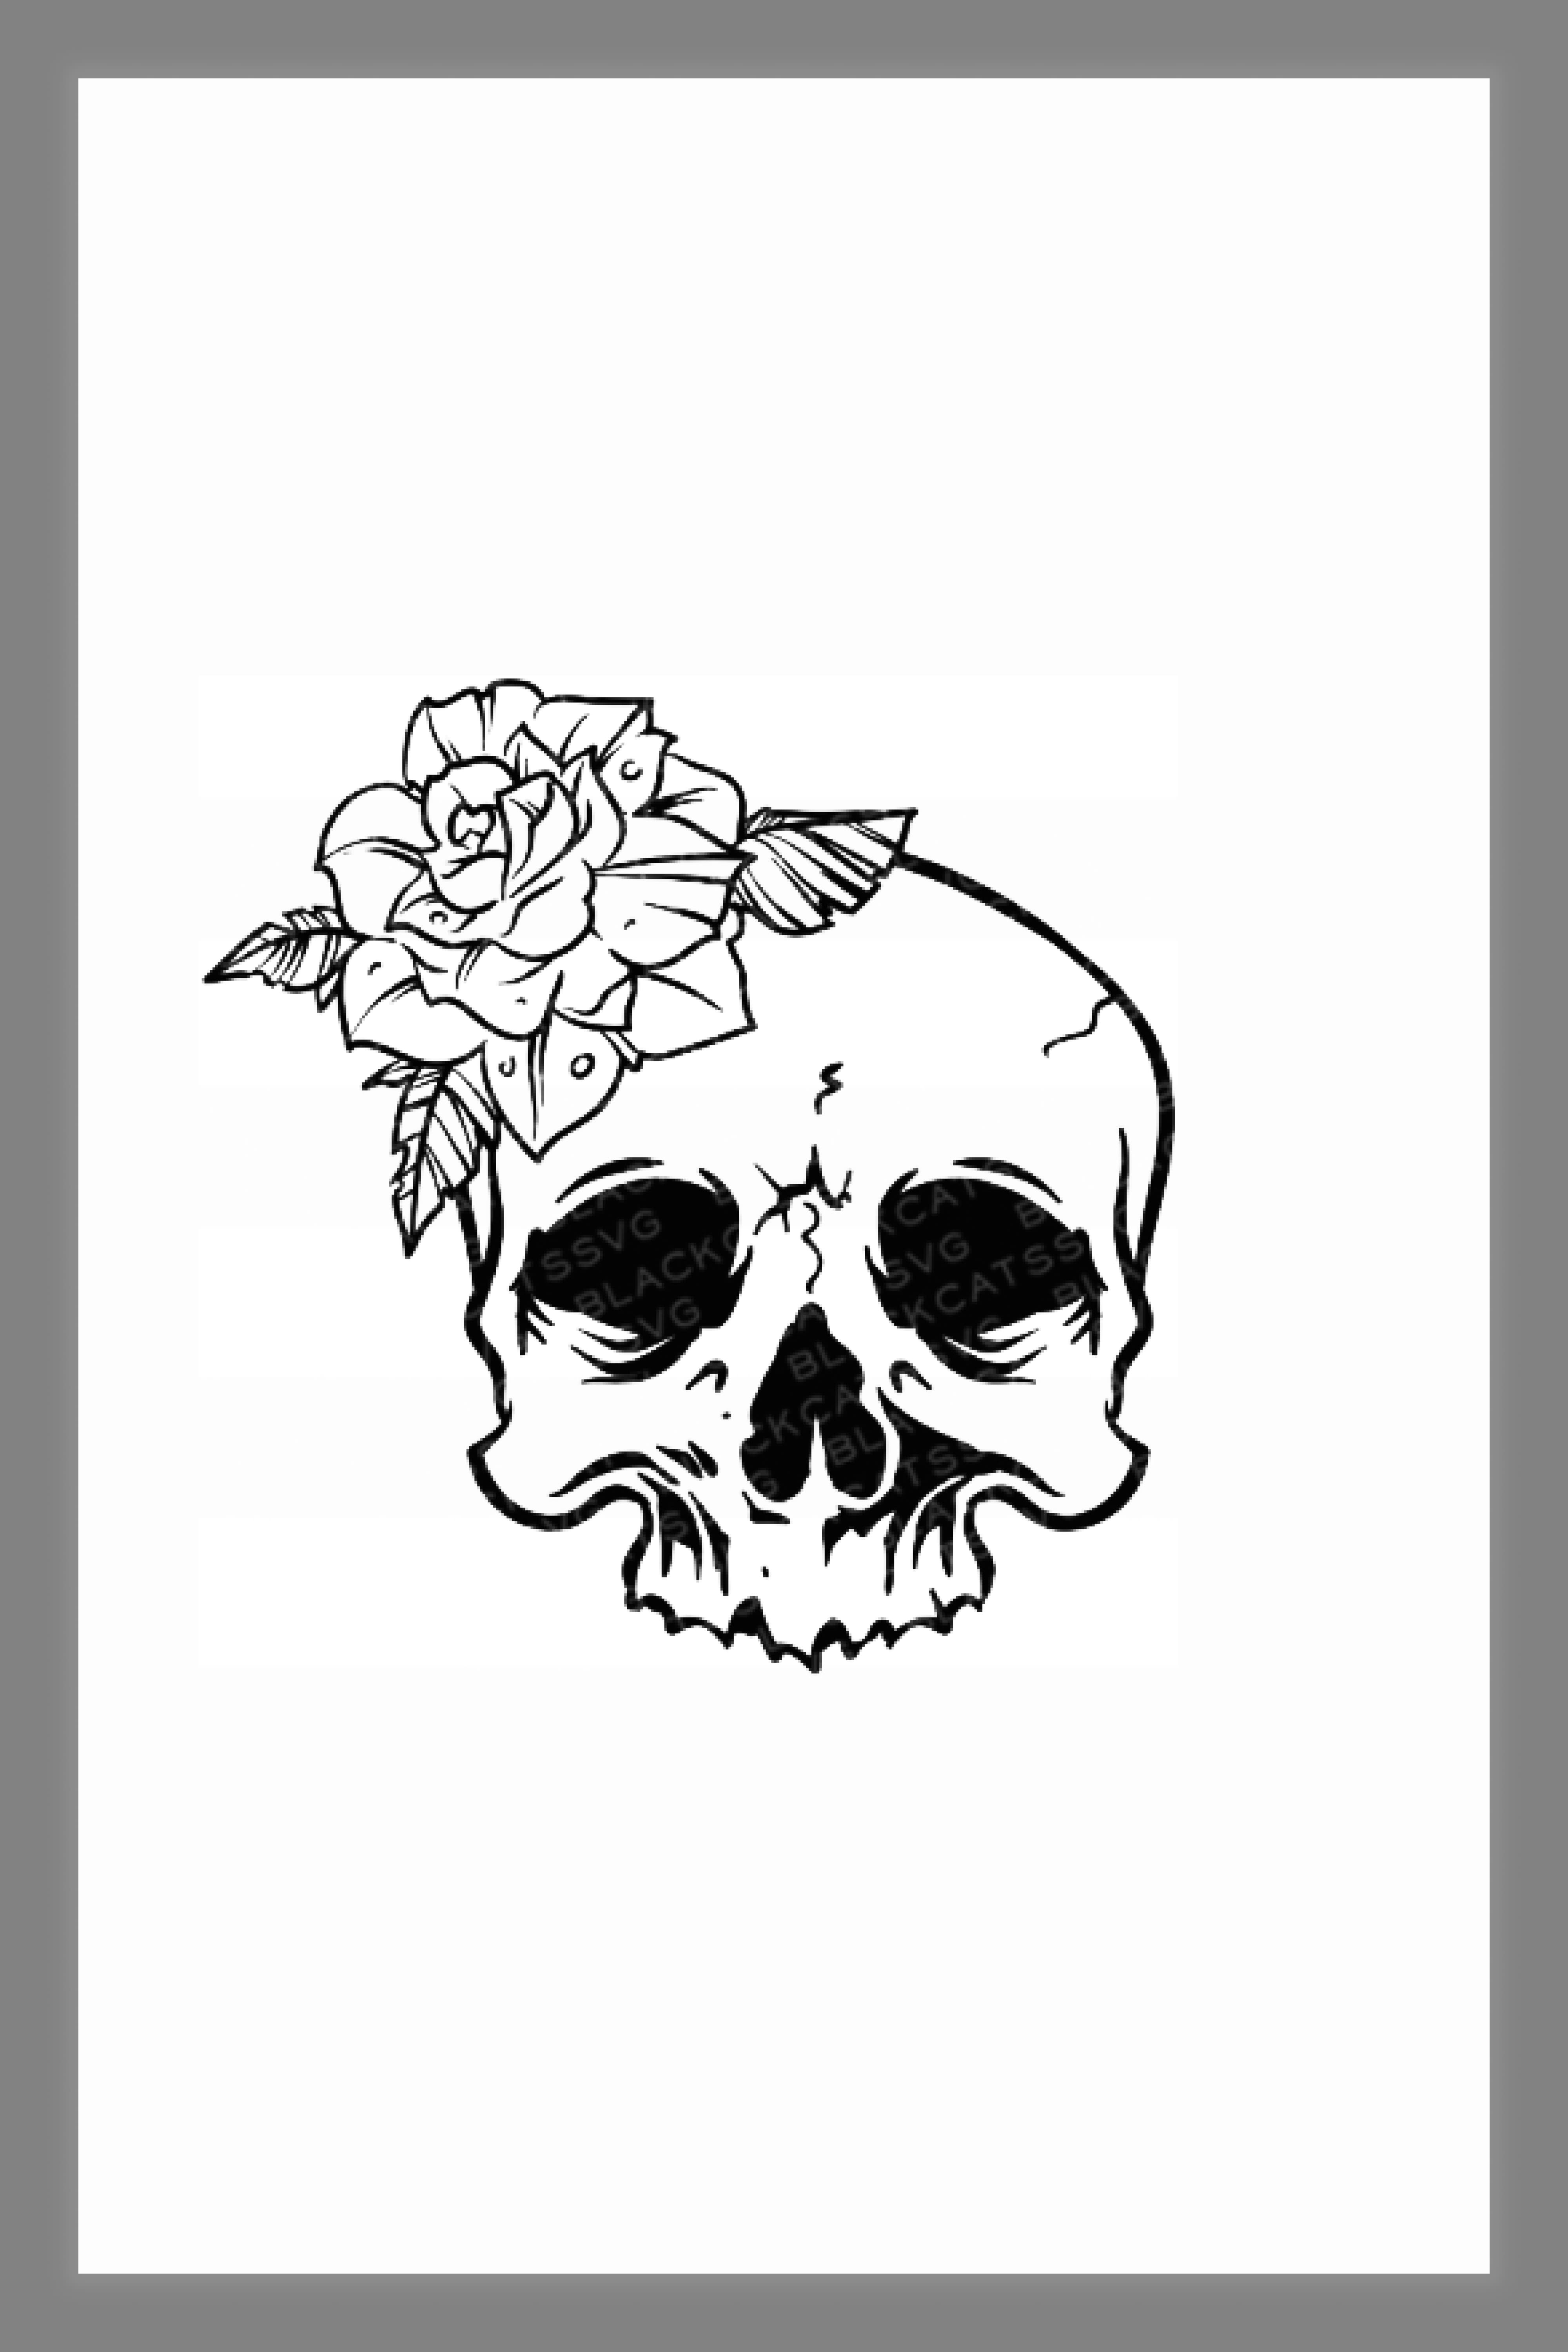 Image of a skull without a lower jaw with a rose on top.